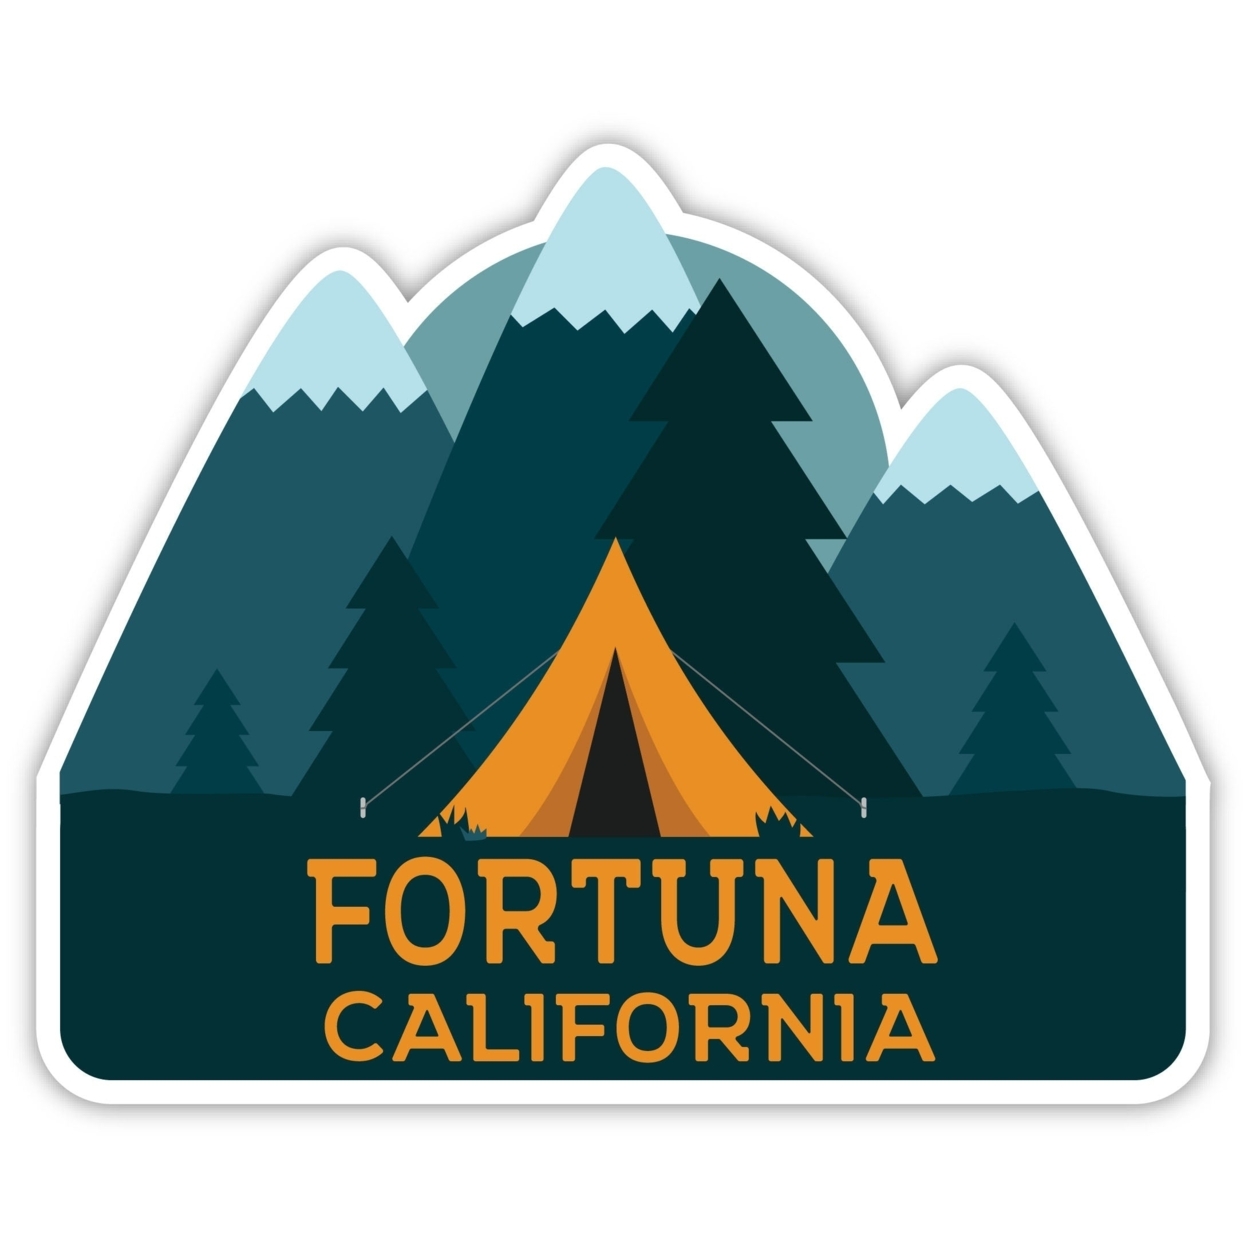 Fortuna California Souvenir Decorative Stickers (Choose Theme And Size) - 4-Pack, 12-Inch, Bear